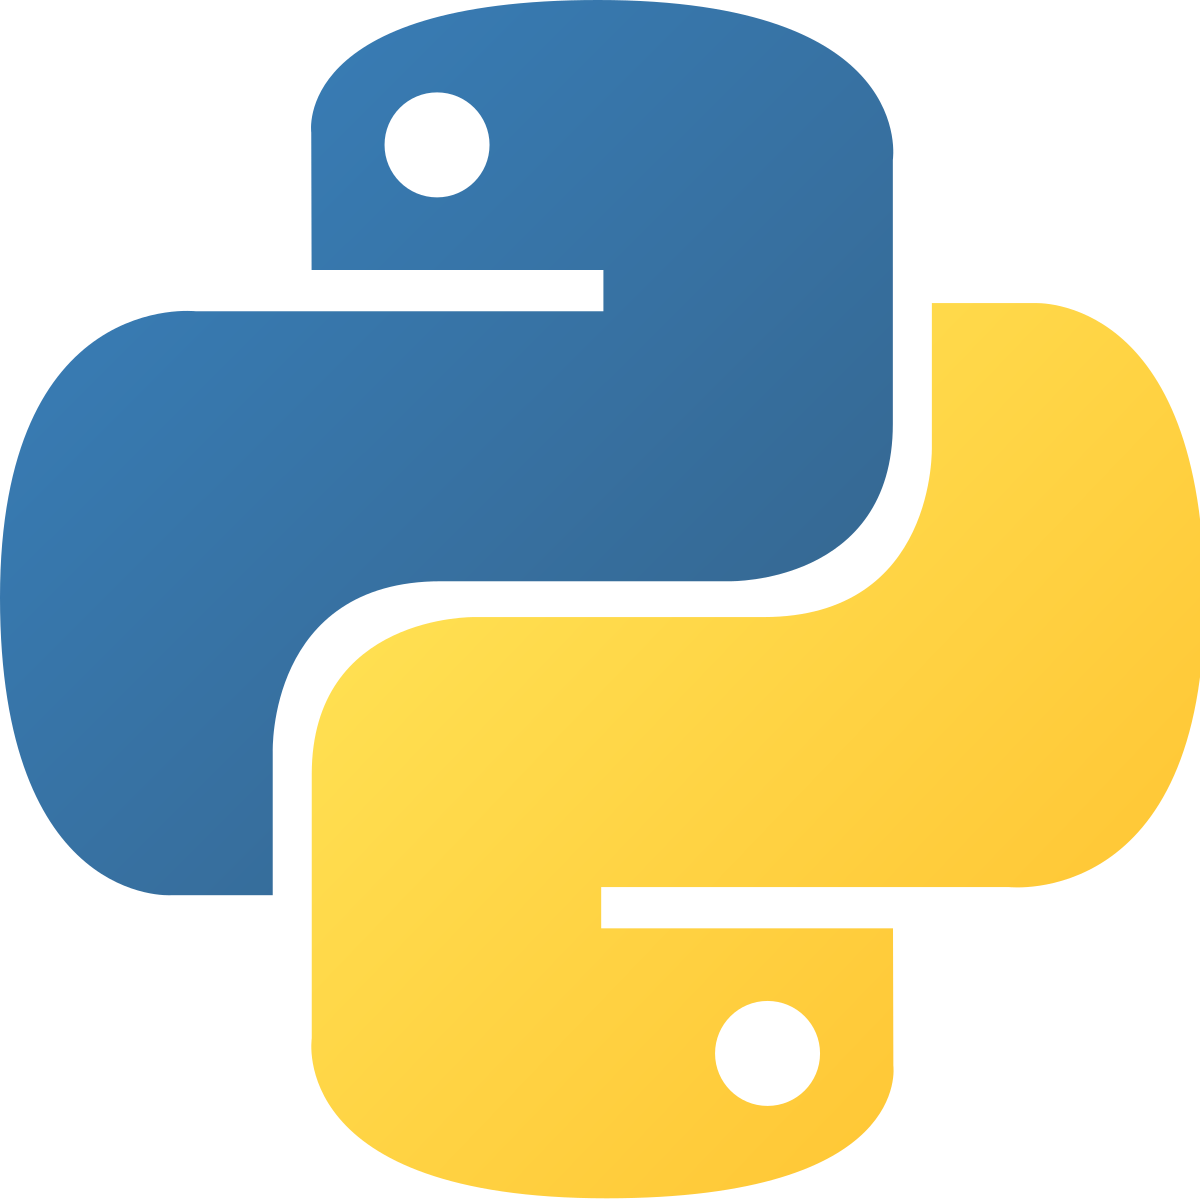 Python Script to Extract Data from Oracle Database to an Excel